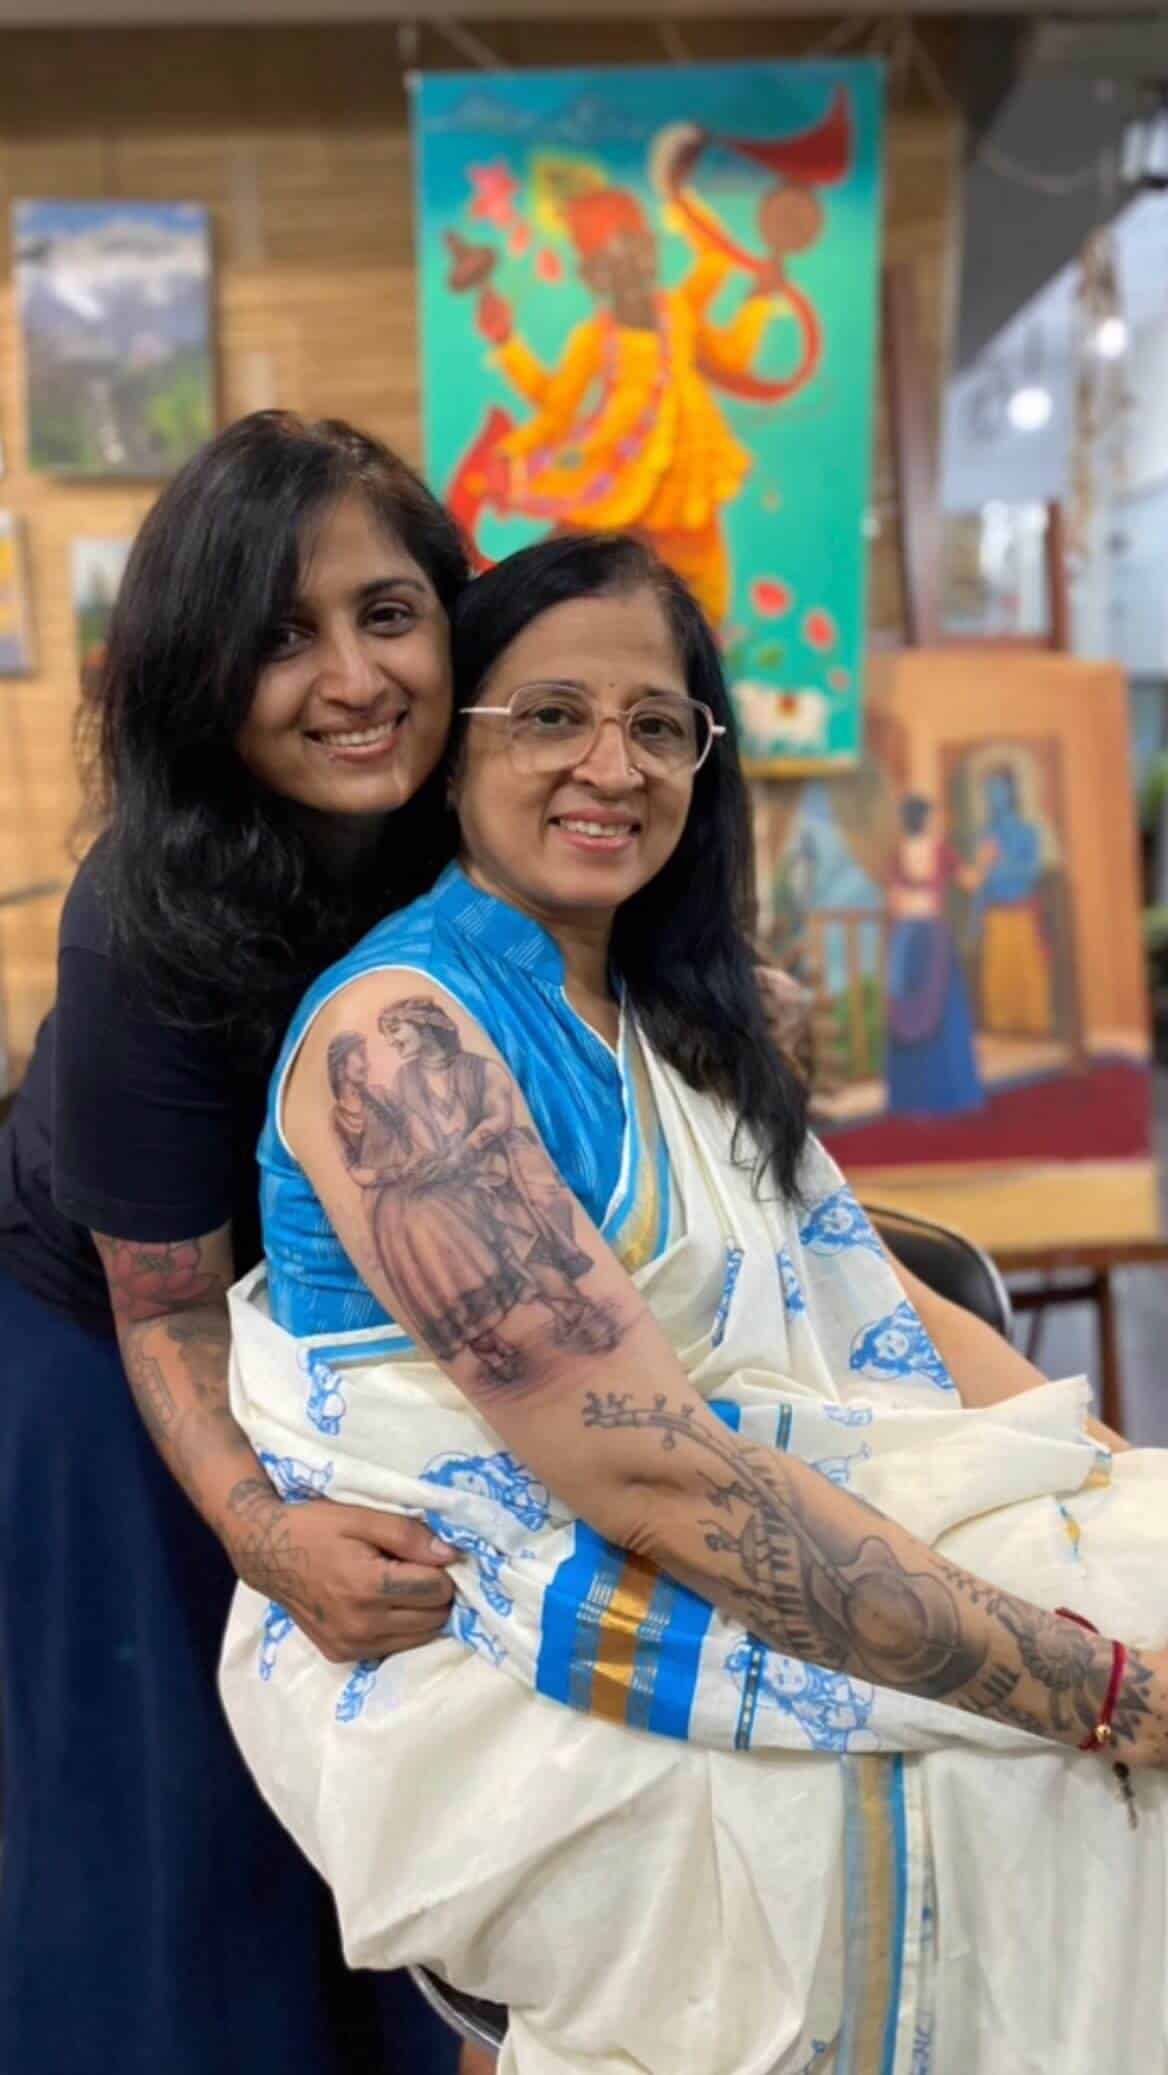 Radha Krishna the eternal love story. And what a beautiful moment to do it on your mom who is as big fan of Radha Krishna as you are. 
And Happy Navratri to everyone of you..
.
.
Done by: @archana_acetattooz 
.
#navratri #navratri2022 #krishnatattoo #radhakrishna #acetattooz #trendingreels #fypシ #explorepage✨ #mumbai